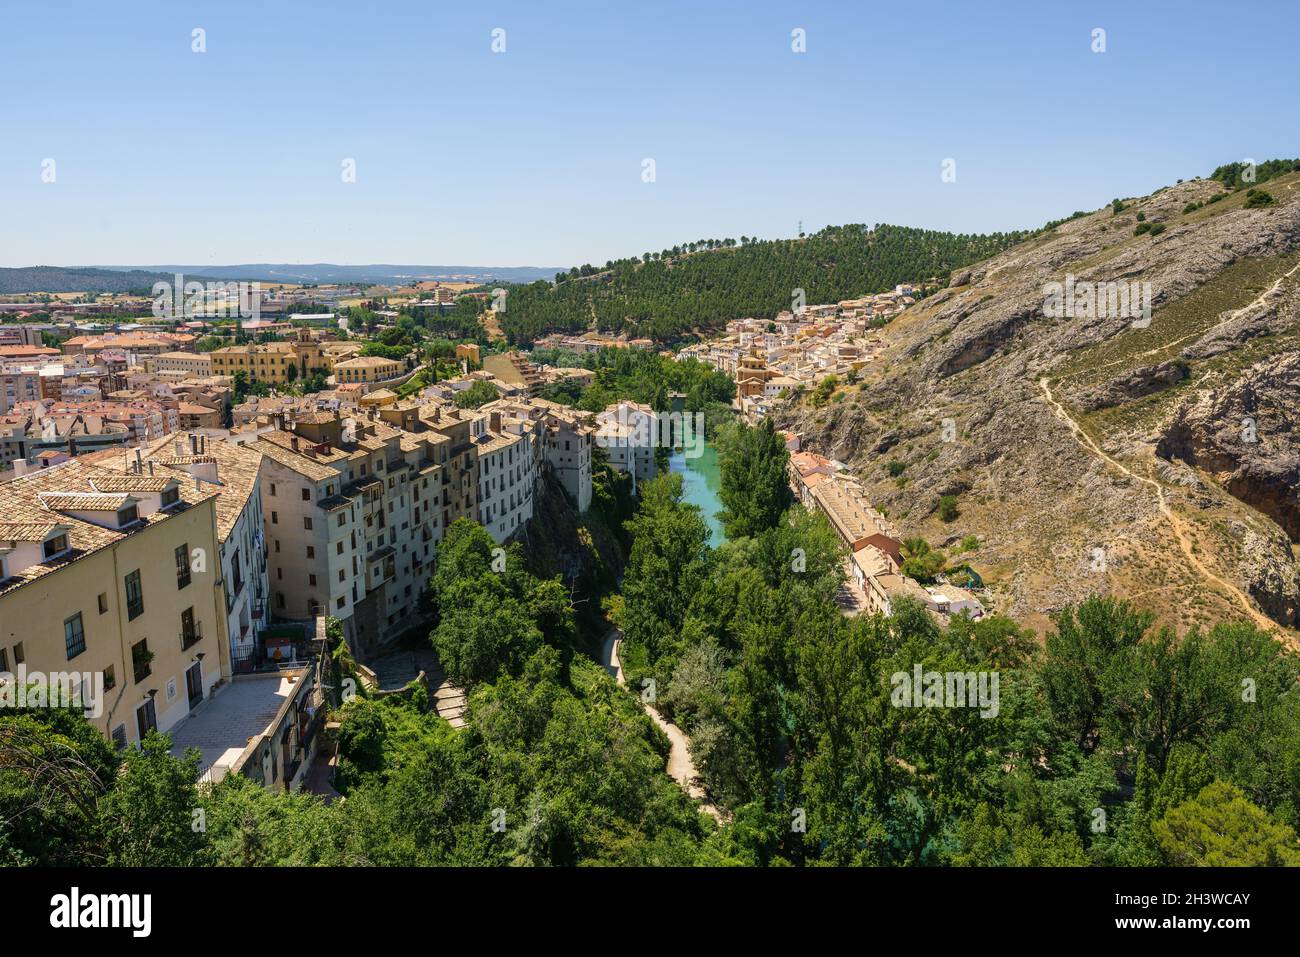 River Jucar surrounds Cuenca old town, Castilla-La Mancha, Spain forming a gorge with lush groves Stock Photo